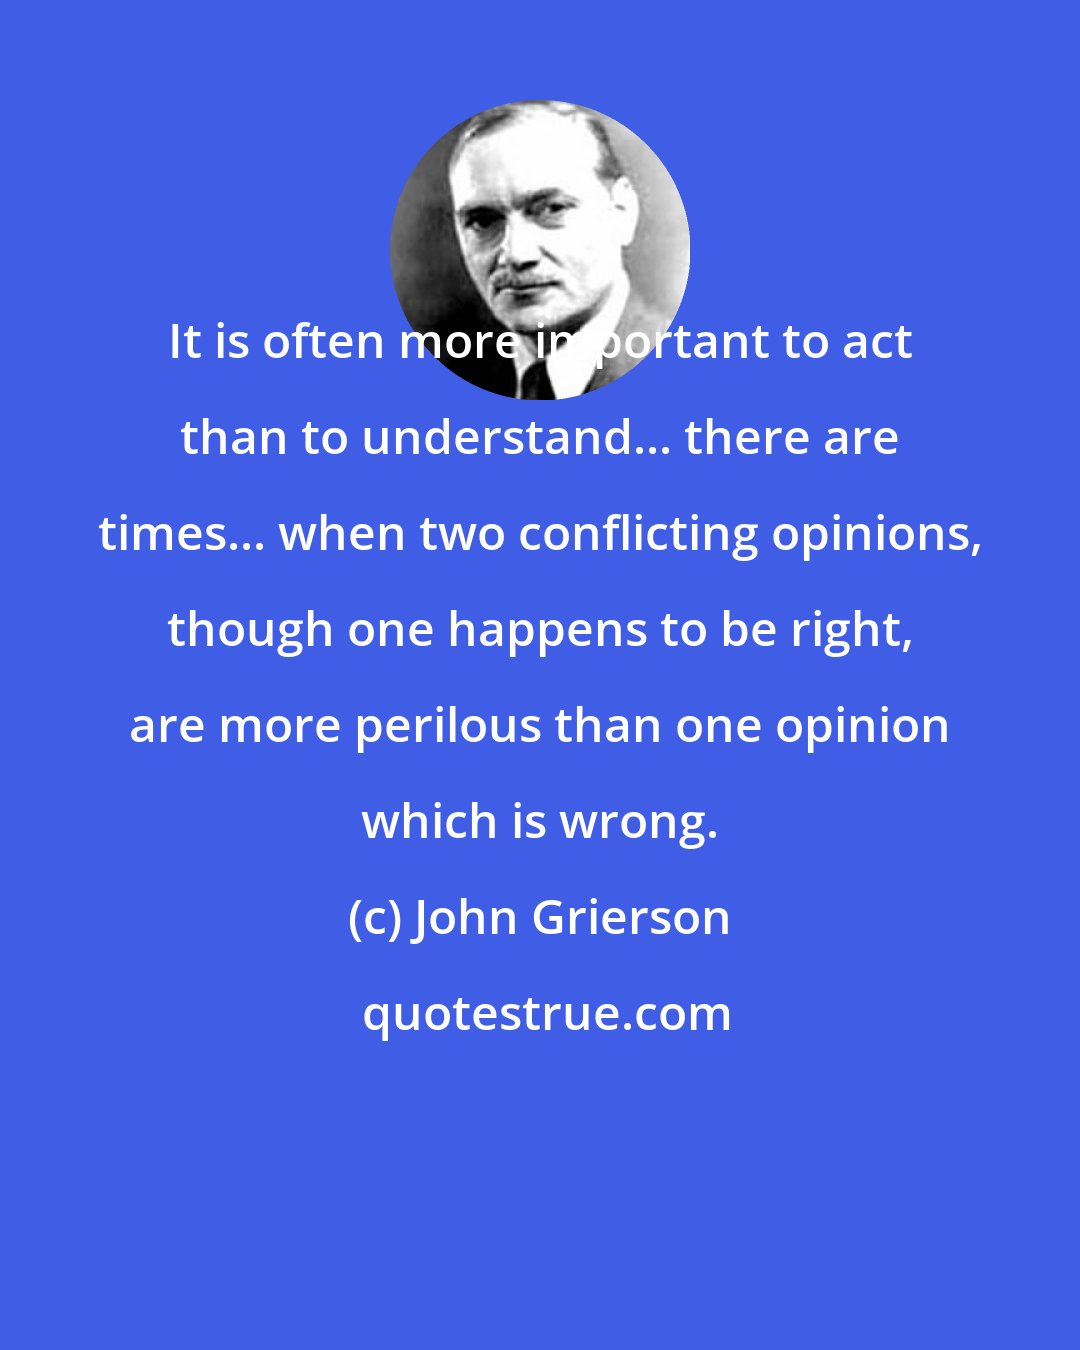 John Grierson: It is often more important to act than to understand... there are times... when two conflicting opinions, though one happens to be right, are more perilous than one opinion which is wrong.